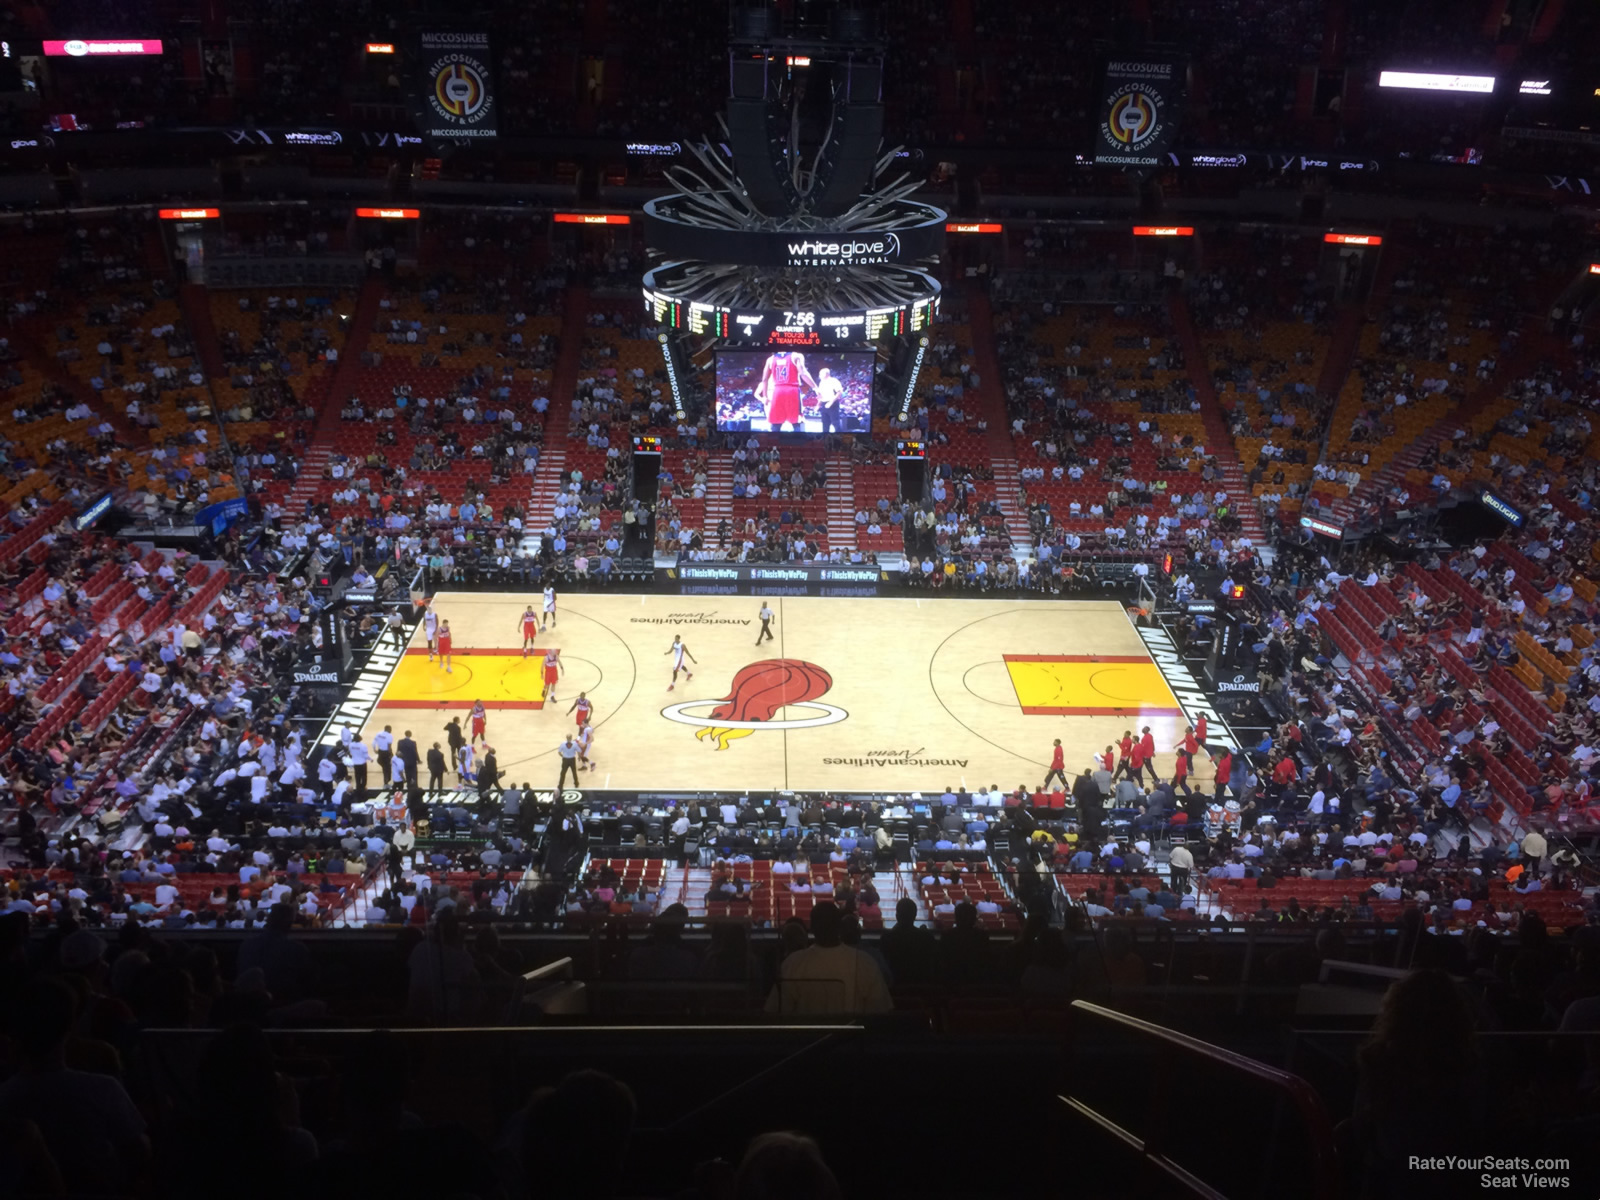 section 309, row 14 seat view  for basketball - kaseya center